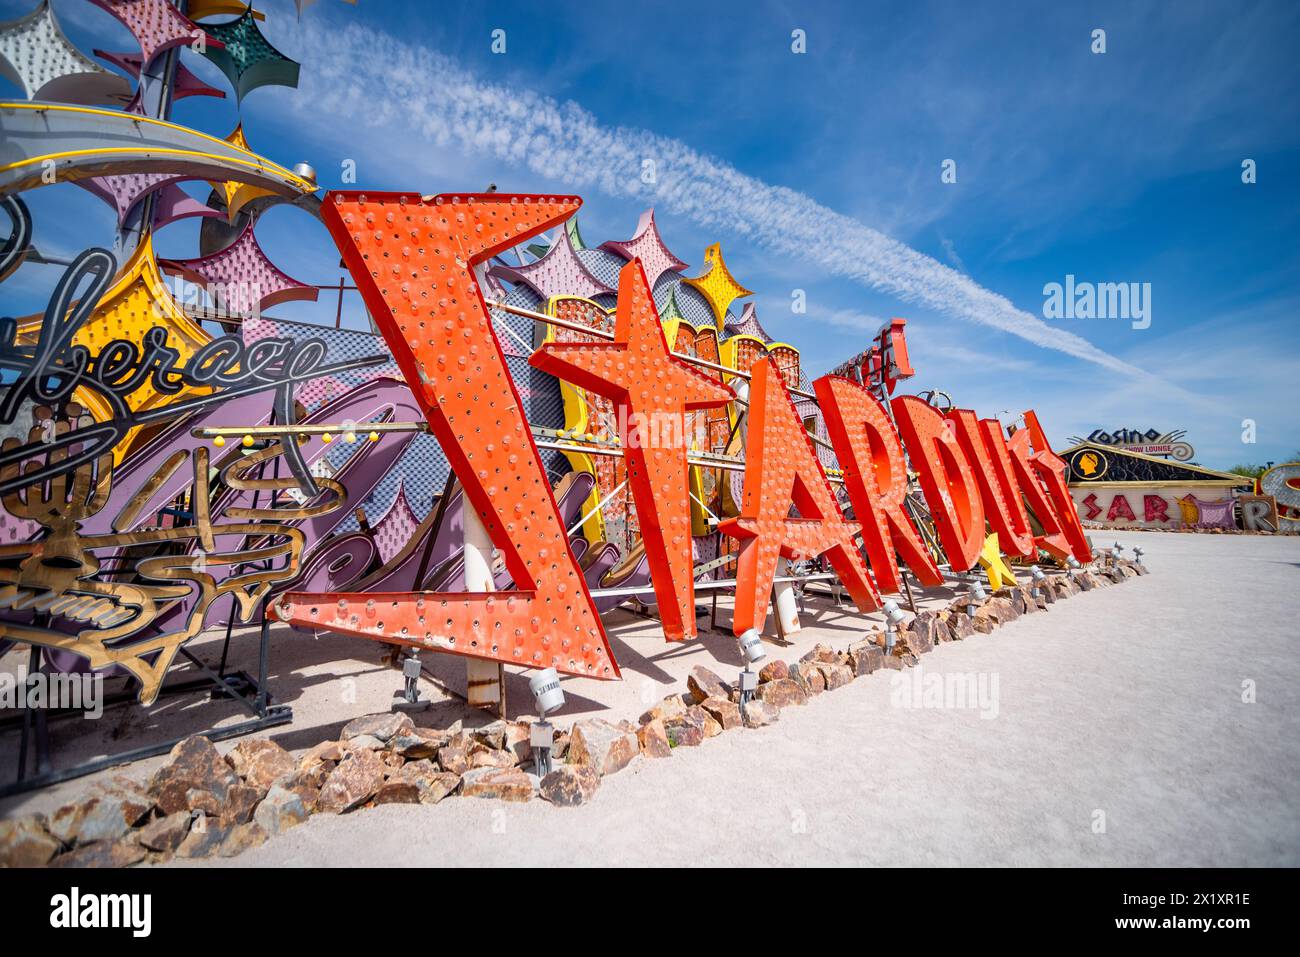 Abandoned and discarded neon sign of Stardust Casino in the Neon Museum aka Neon boneyard in Las Vegas, Nevada. Stock Photo